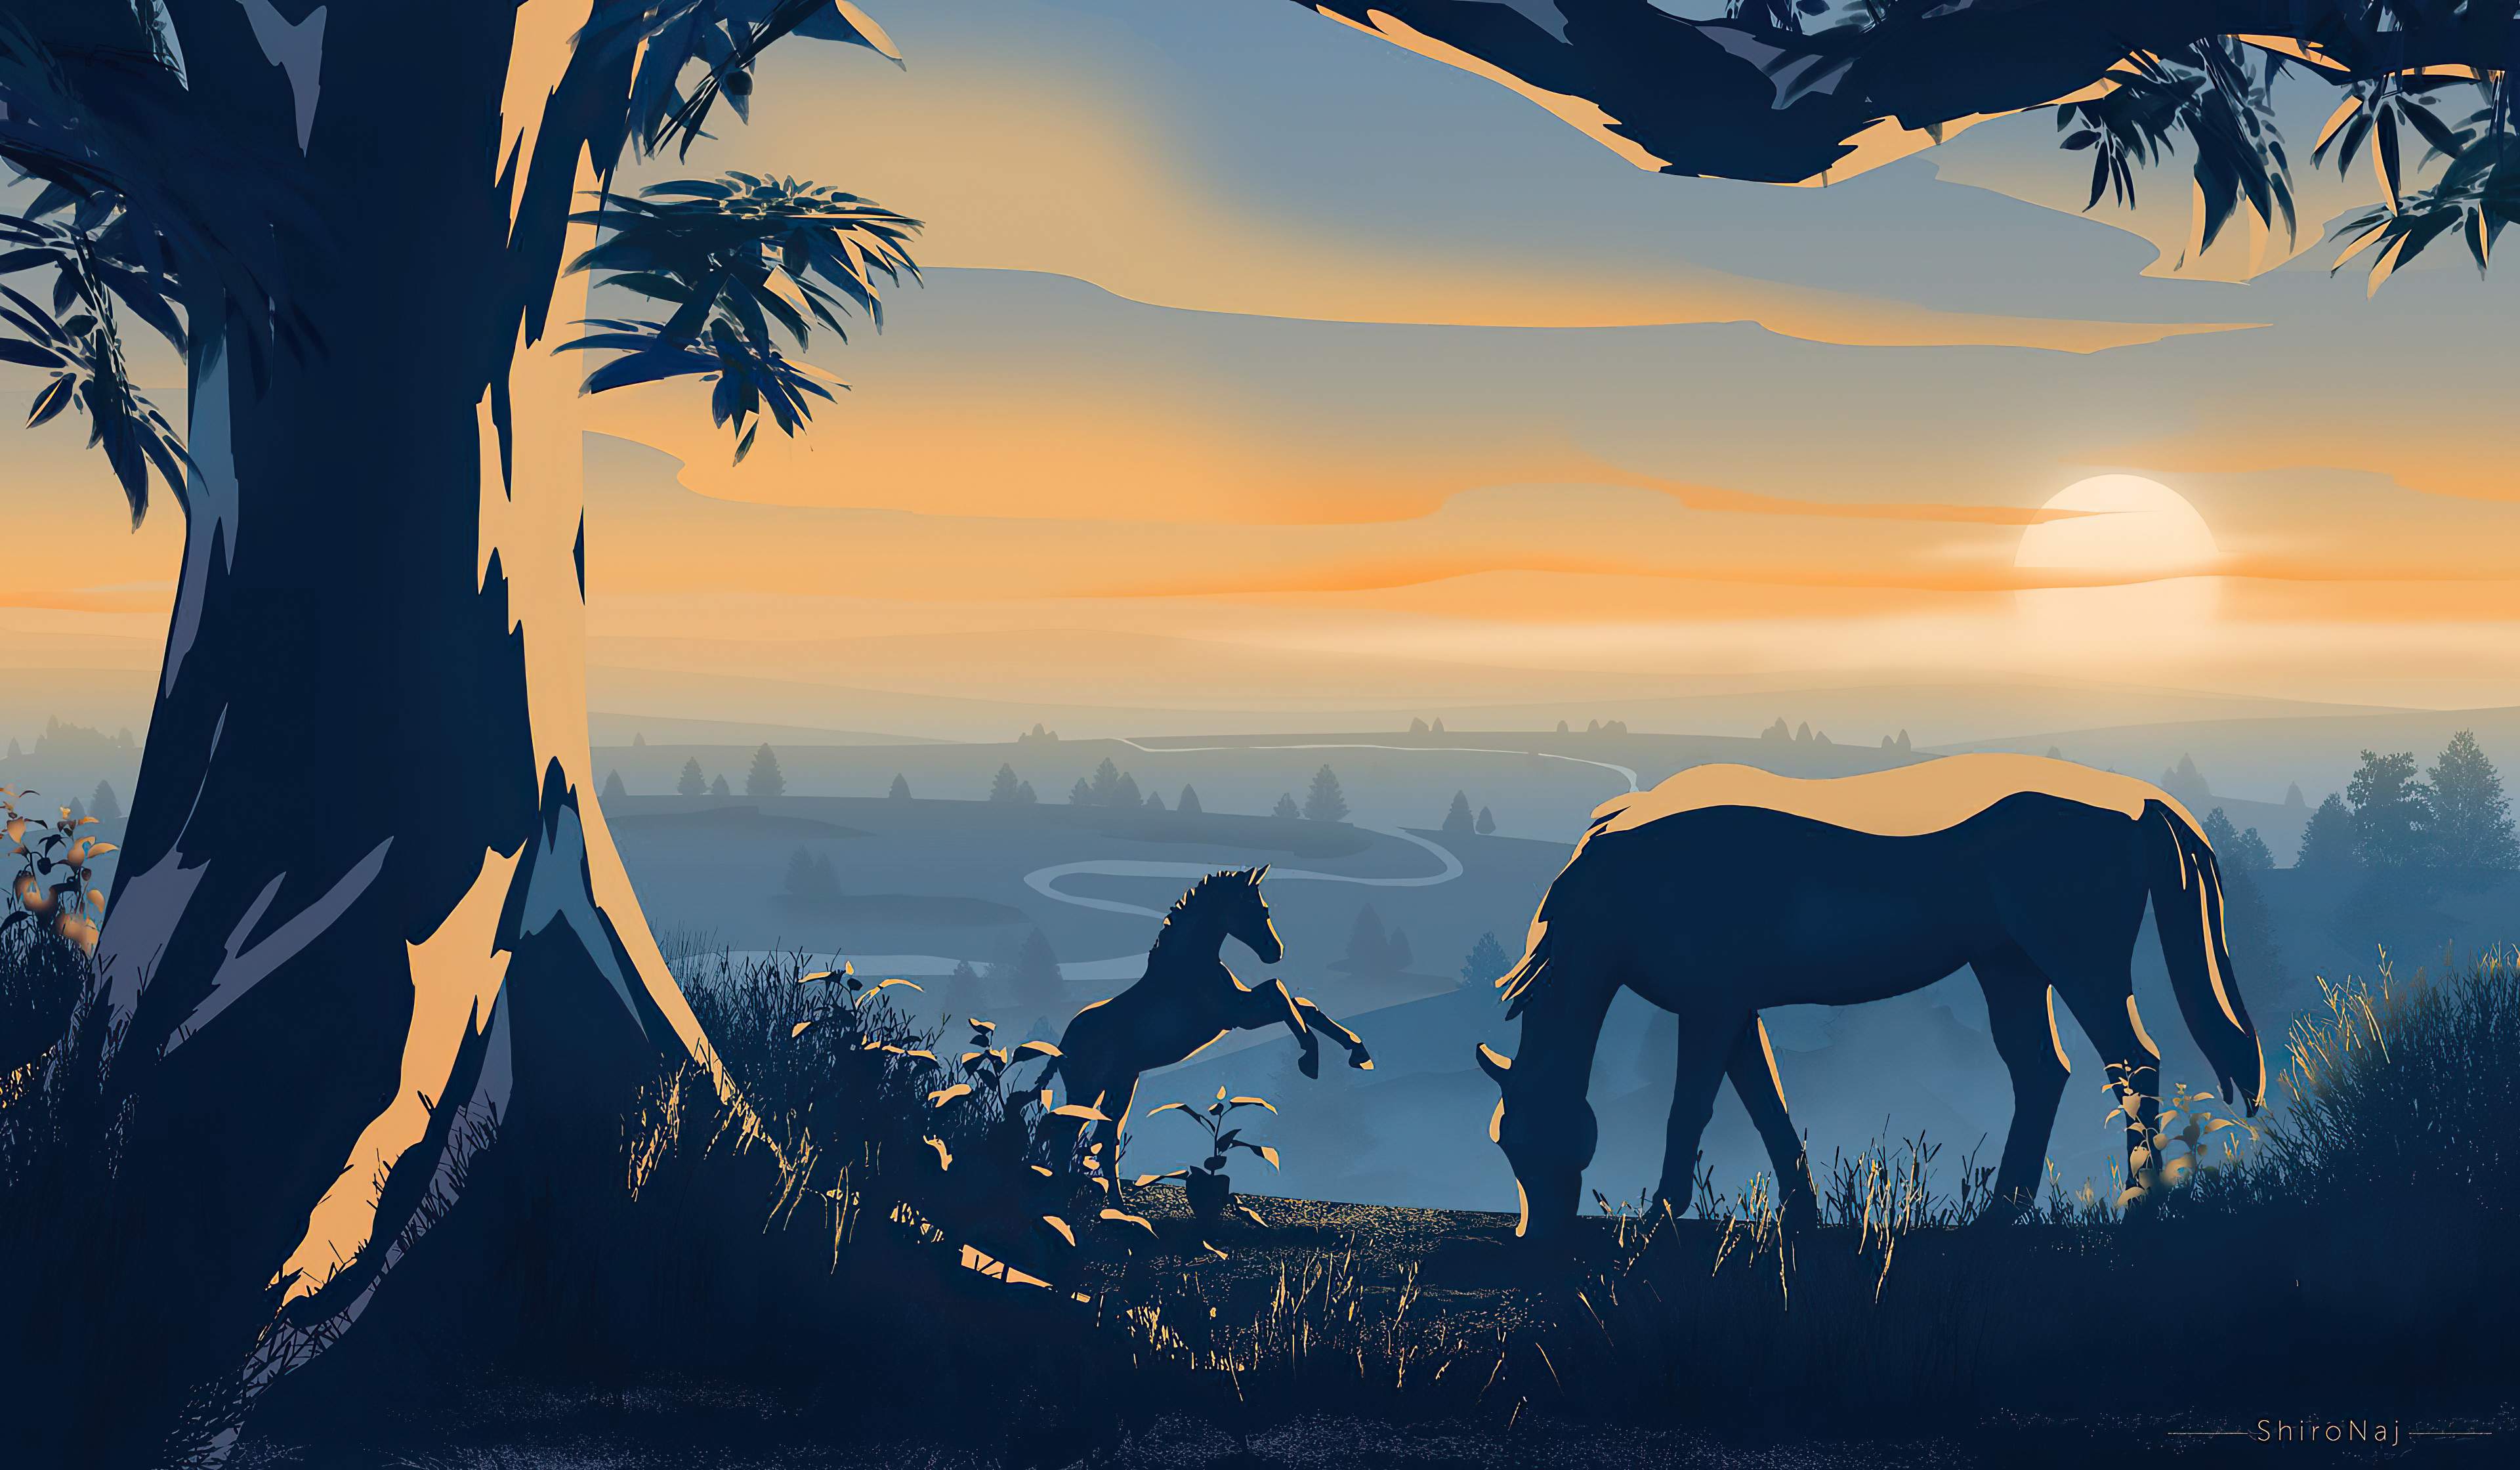 Horses Dawn Minimal 4k, HD Artist, 4k Wallpaper, Image, Background, Photo and Picture